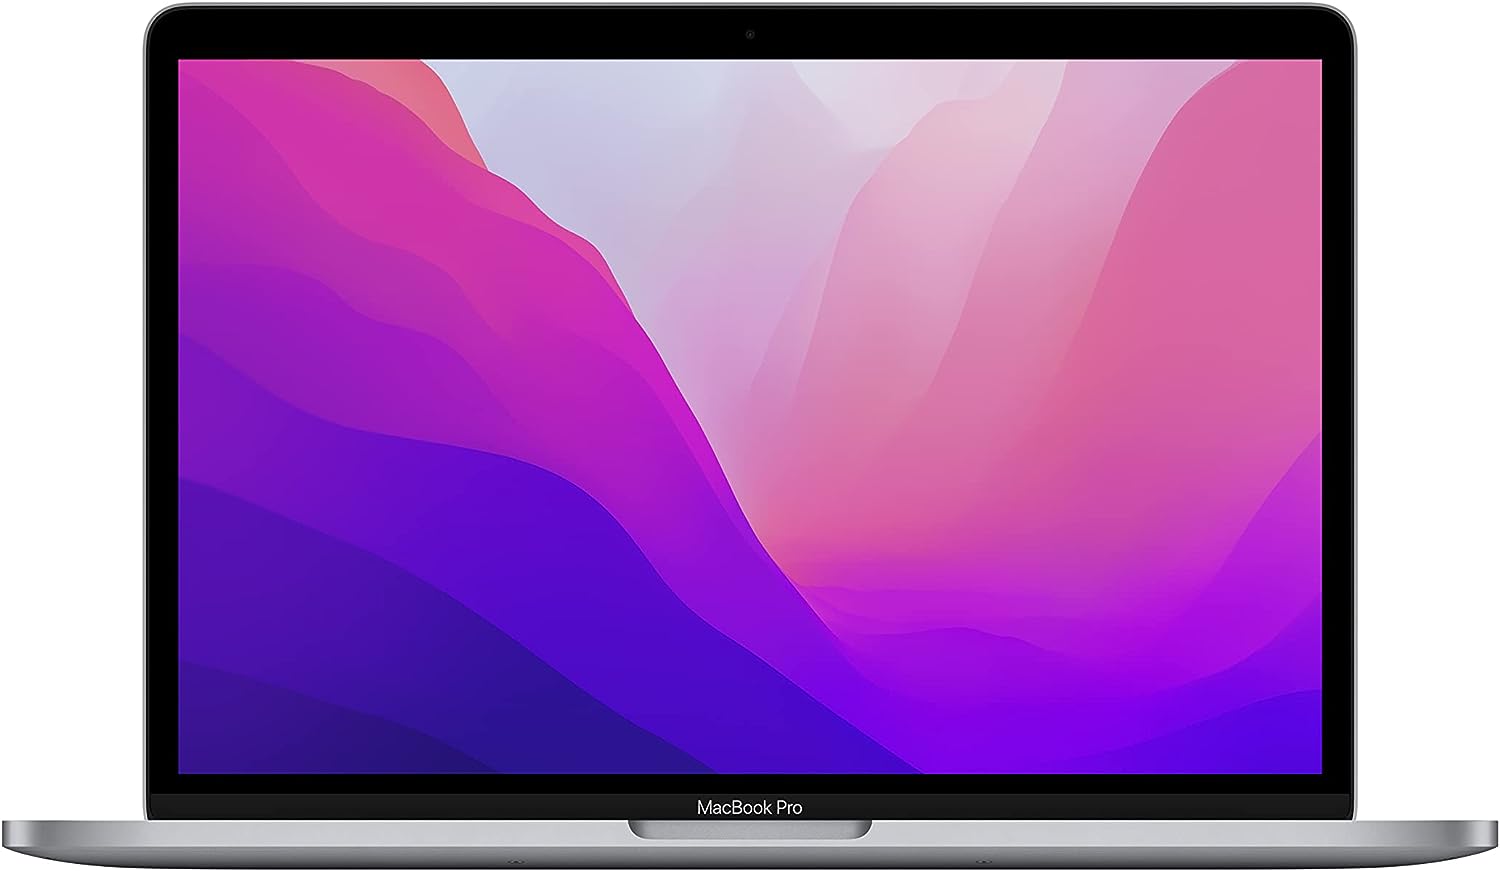 Apple MacBook Pro 13.3 with Retina Display, M2 Chip with 8-Core CPU and 10-Core GPU, 16GB Memory, 512GB SSD, Space Gray, Mid 2022